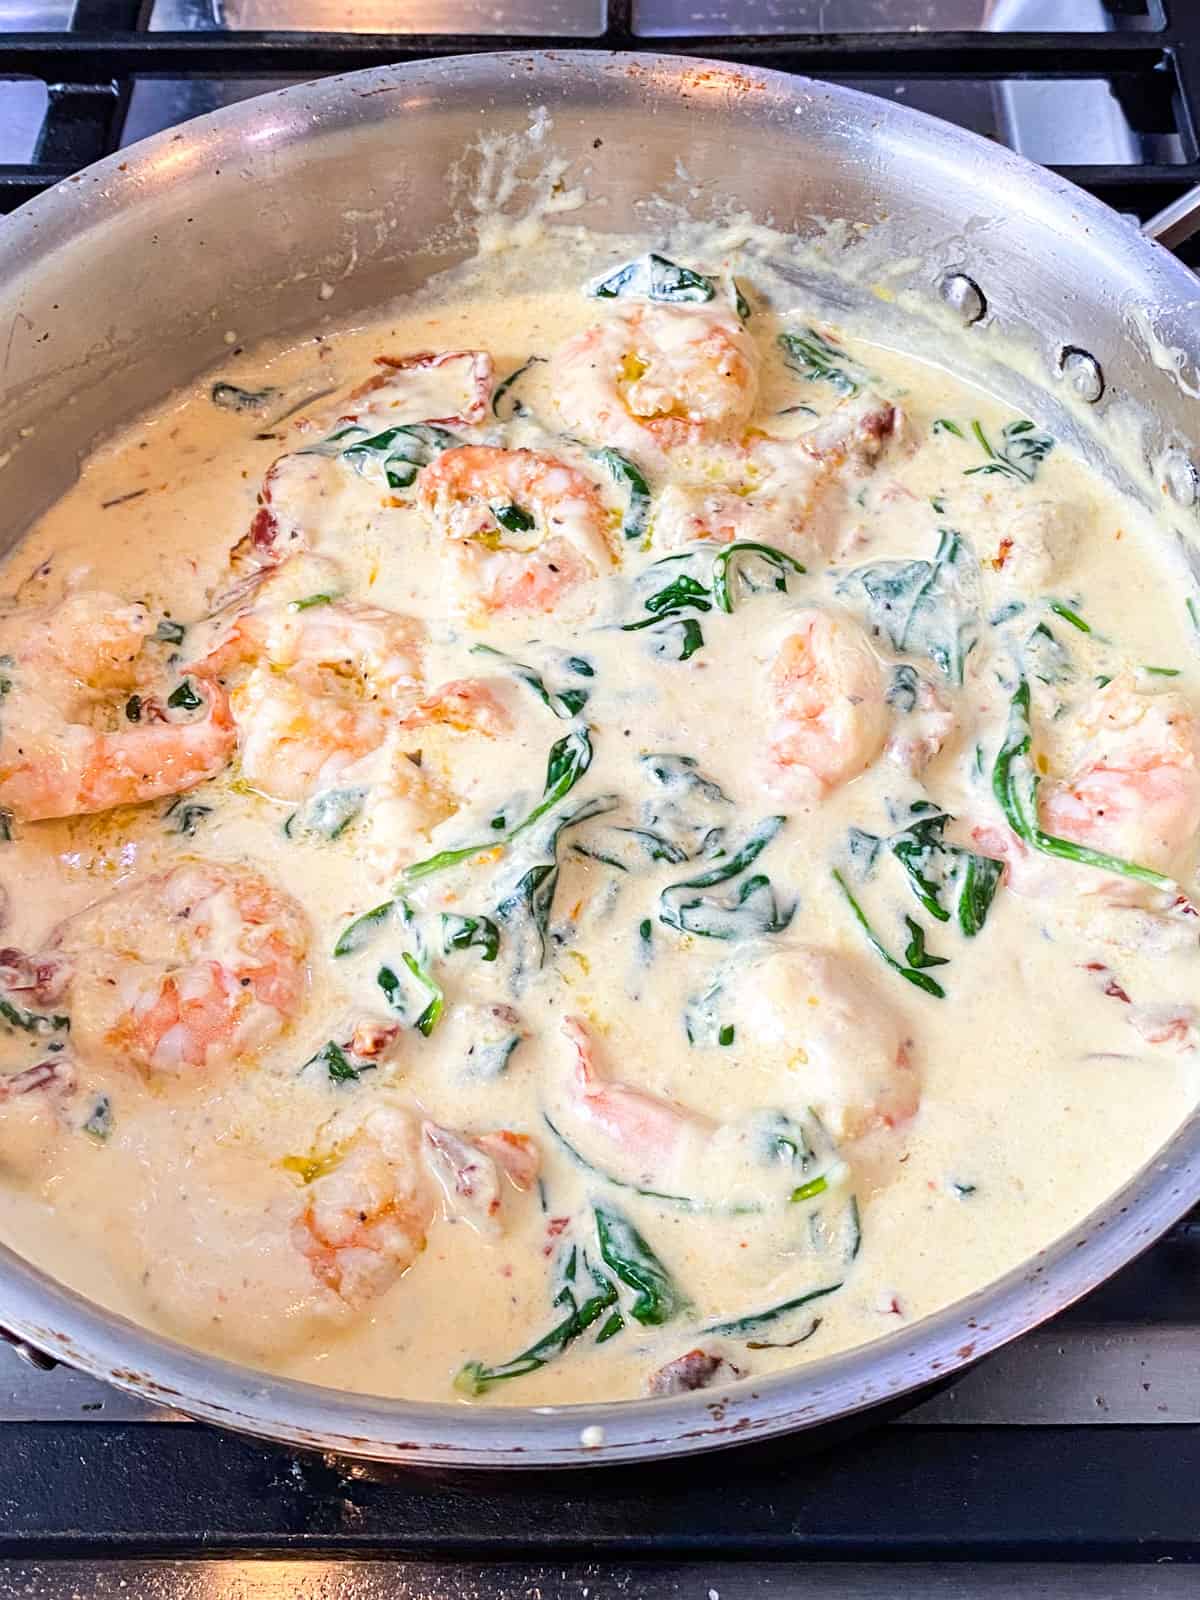 Add the seared shrimp to the cream sauce right towards the end.